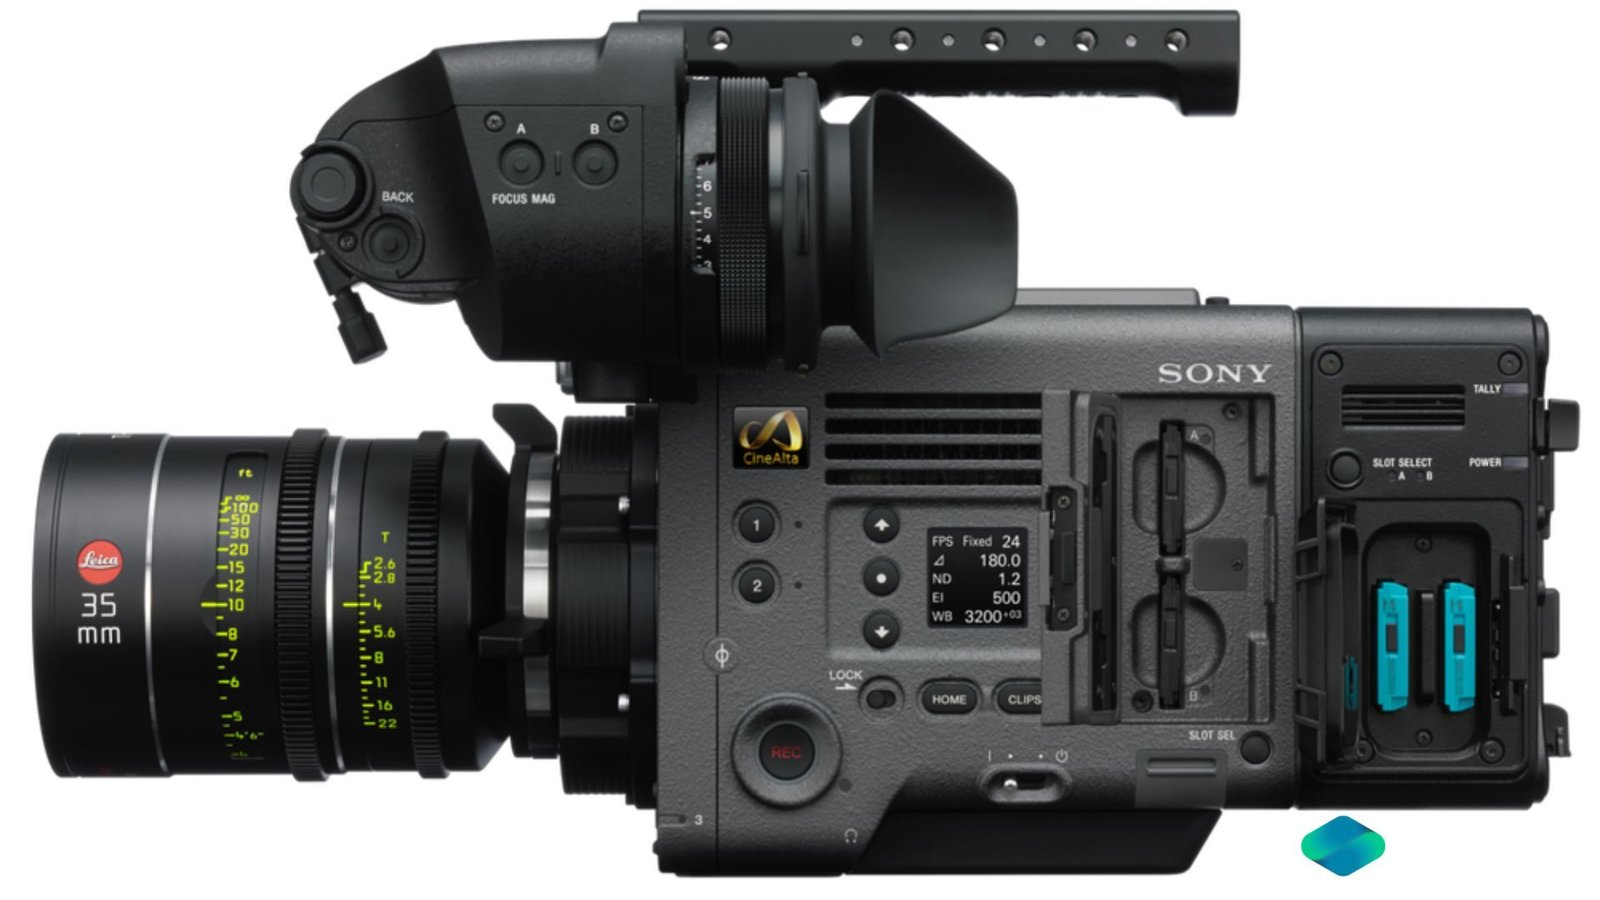 Rent Sony VENICE Digital Motion Picture Camera in Delhi NCR, Camera lenses for rent, Camera accessories, in Delhi Gurgaon Noida, hire Shooting equipment, Lighting equipment rental, Film gear rental for Video production, camera rental company in Delhi, film equipment rental company